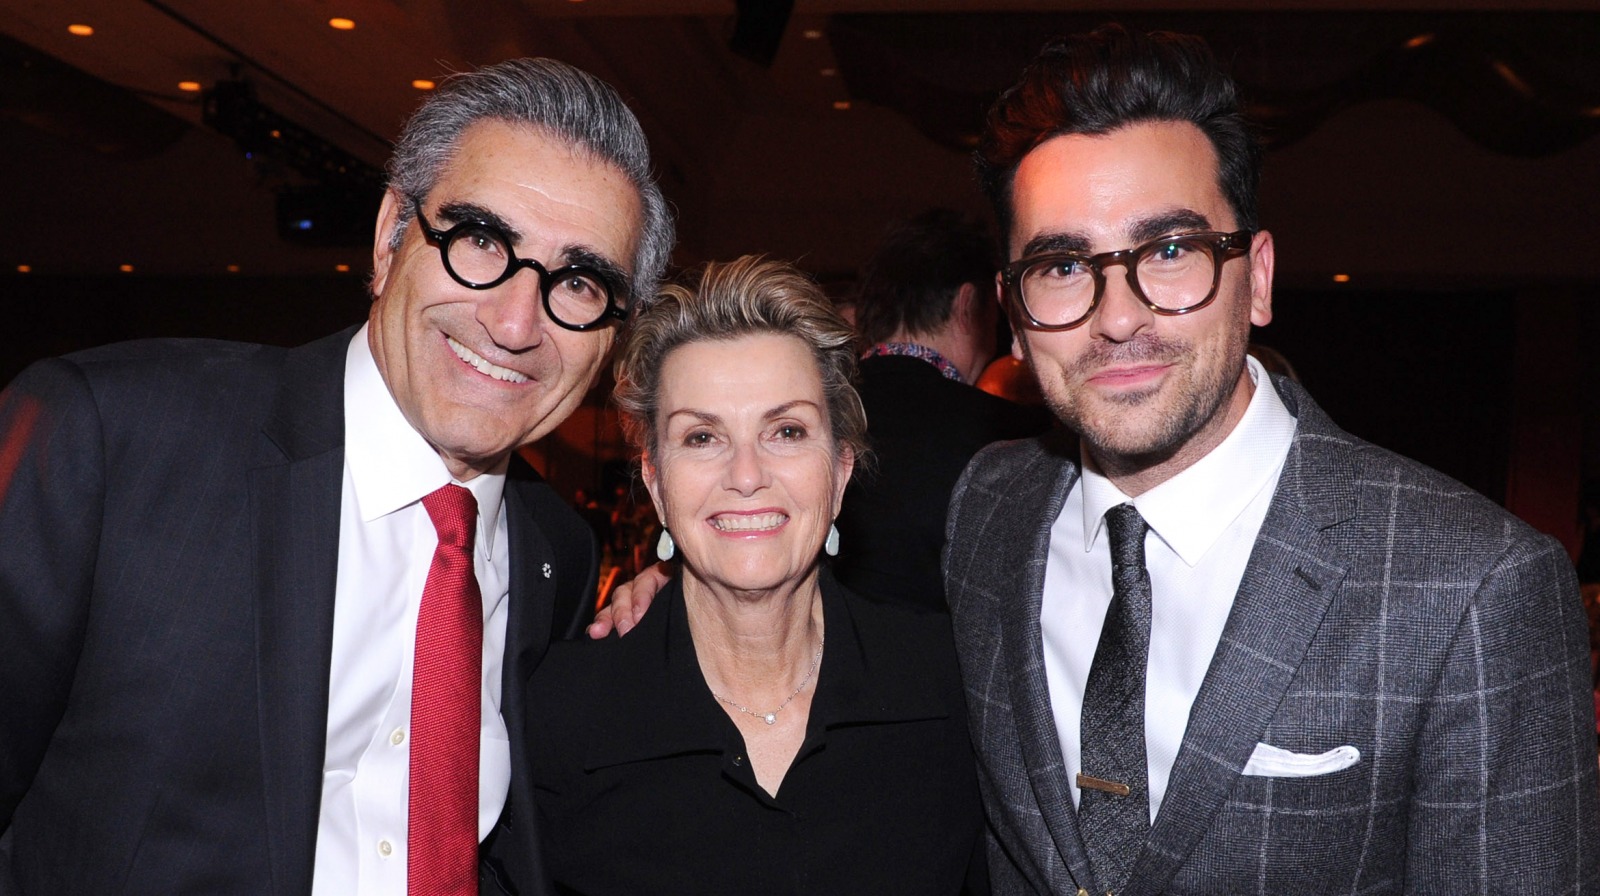 Who Is Eugene Levy's Wife?